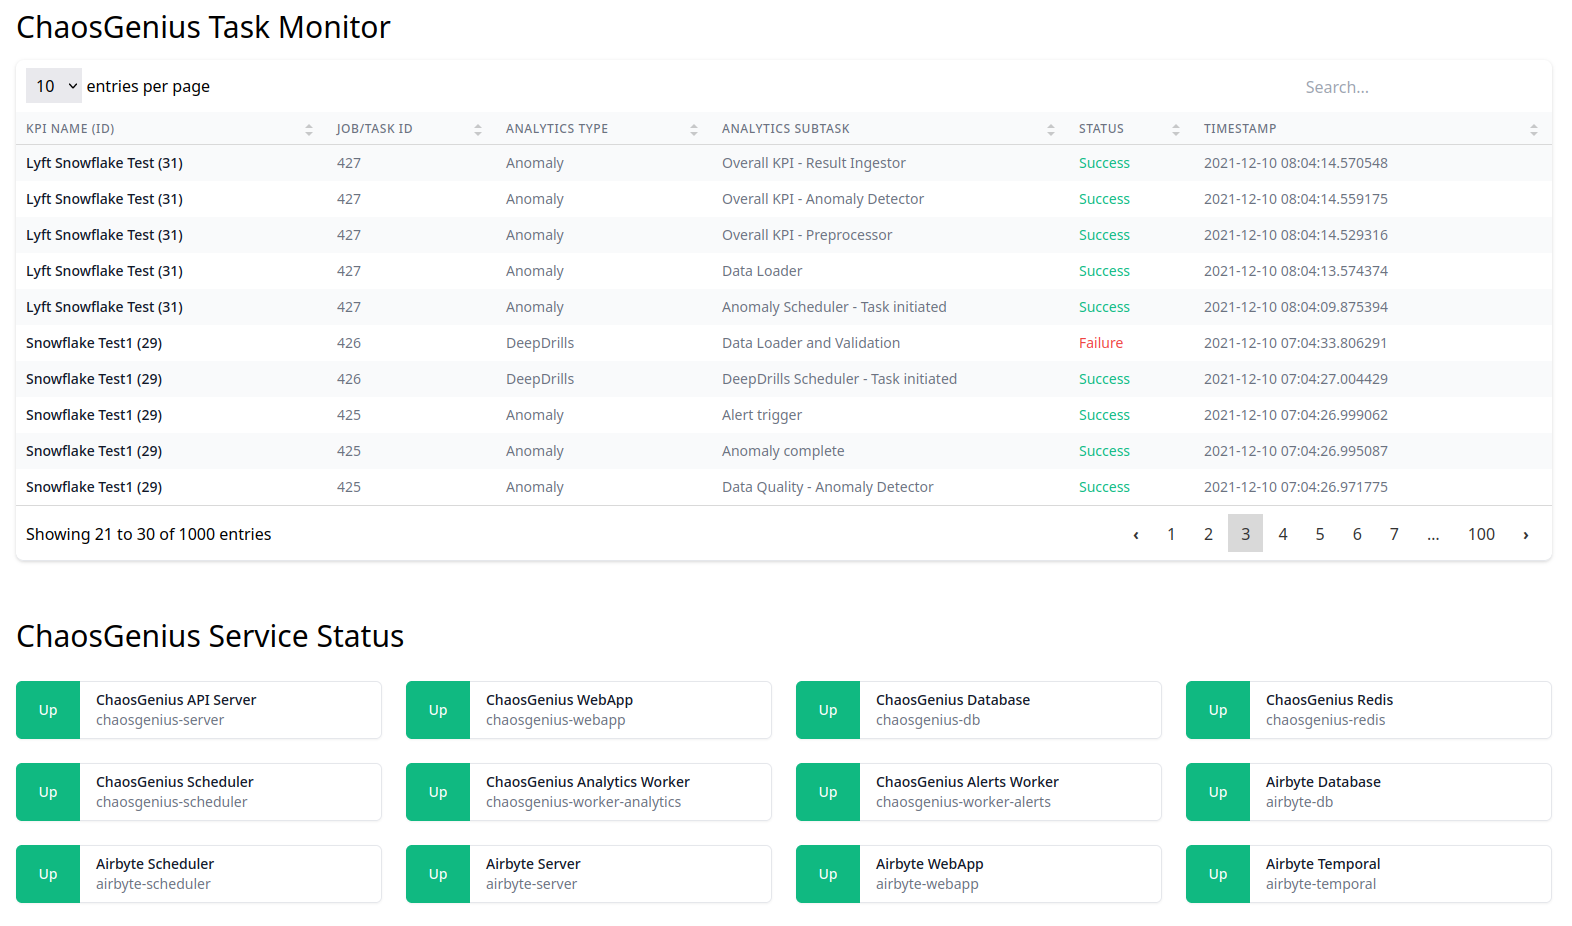 A screenshot of the status page showing the task monitor table and the service status